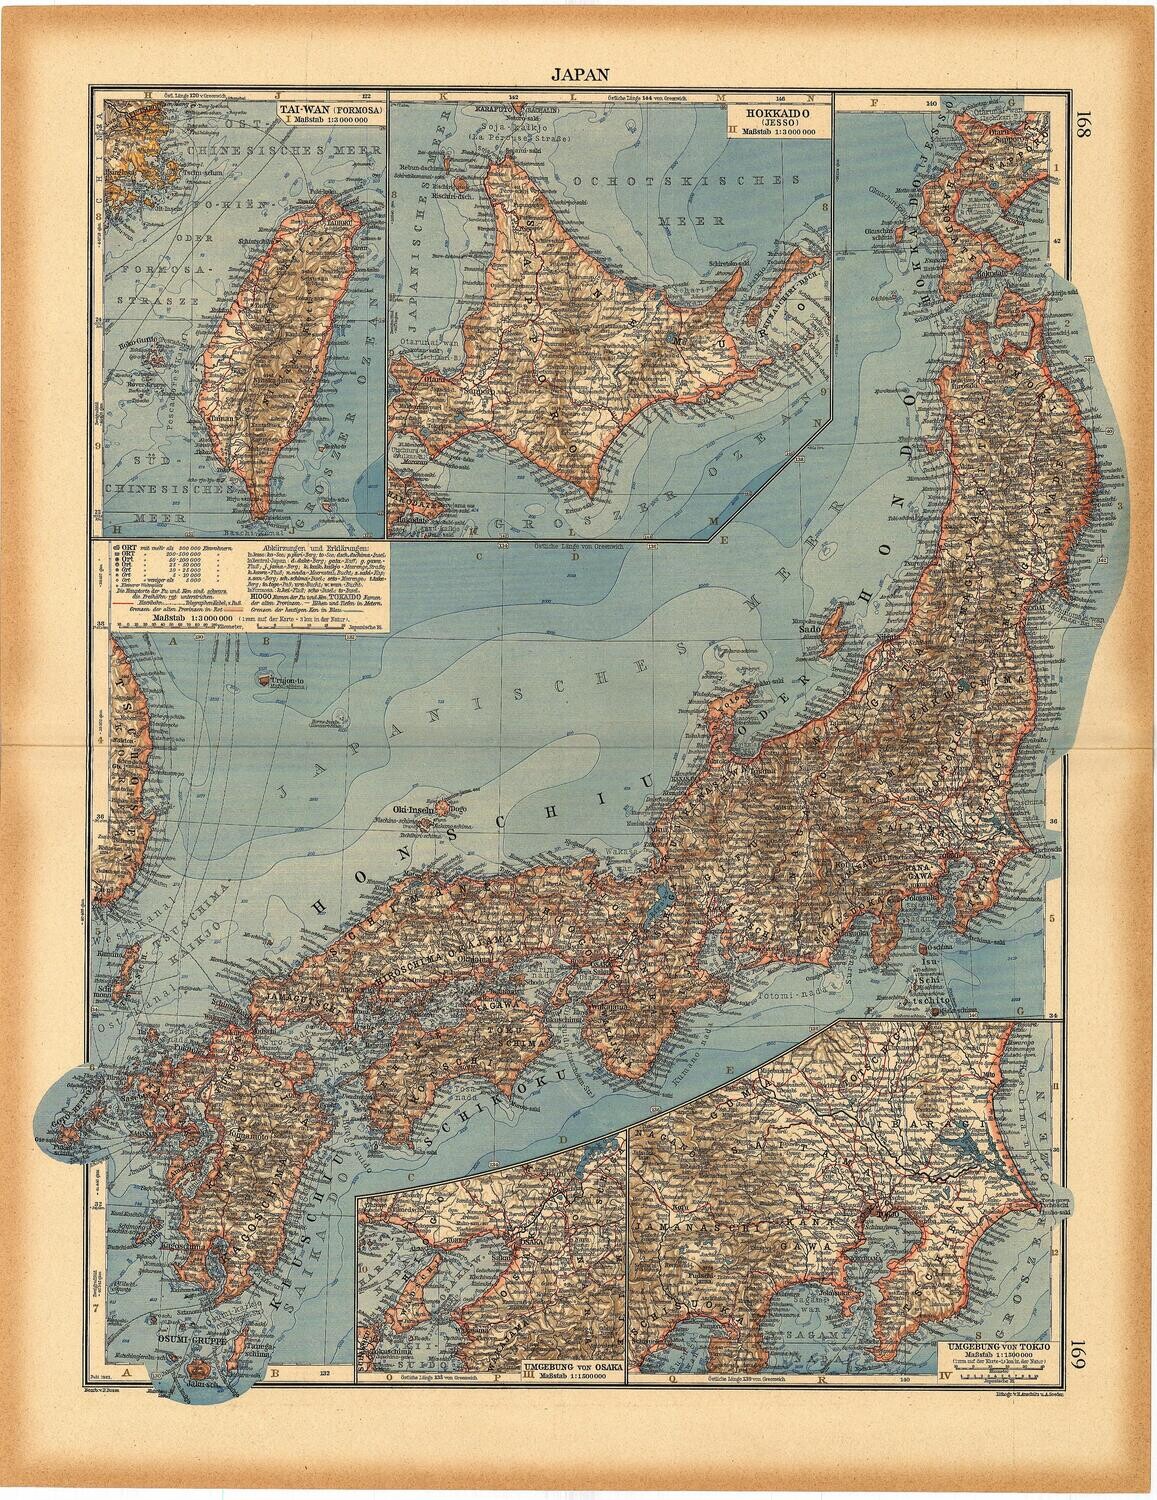 1923 Map of Japan by Stieler in Chromolithography in German